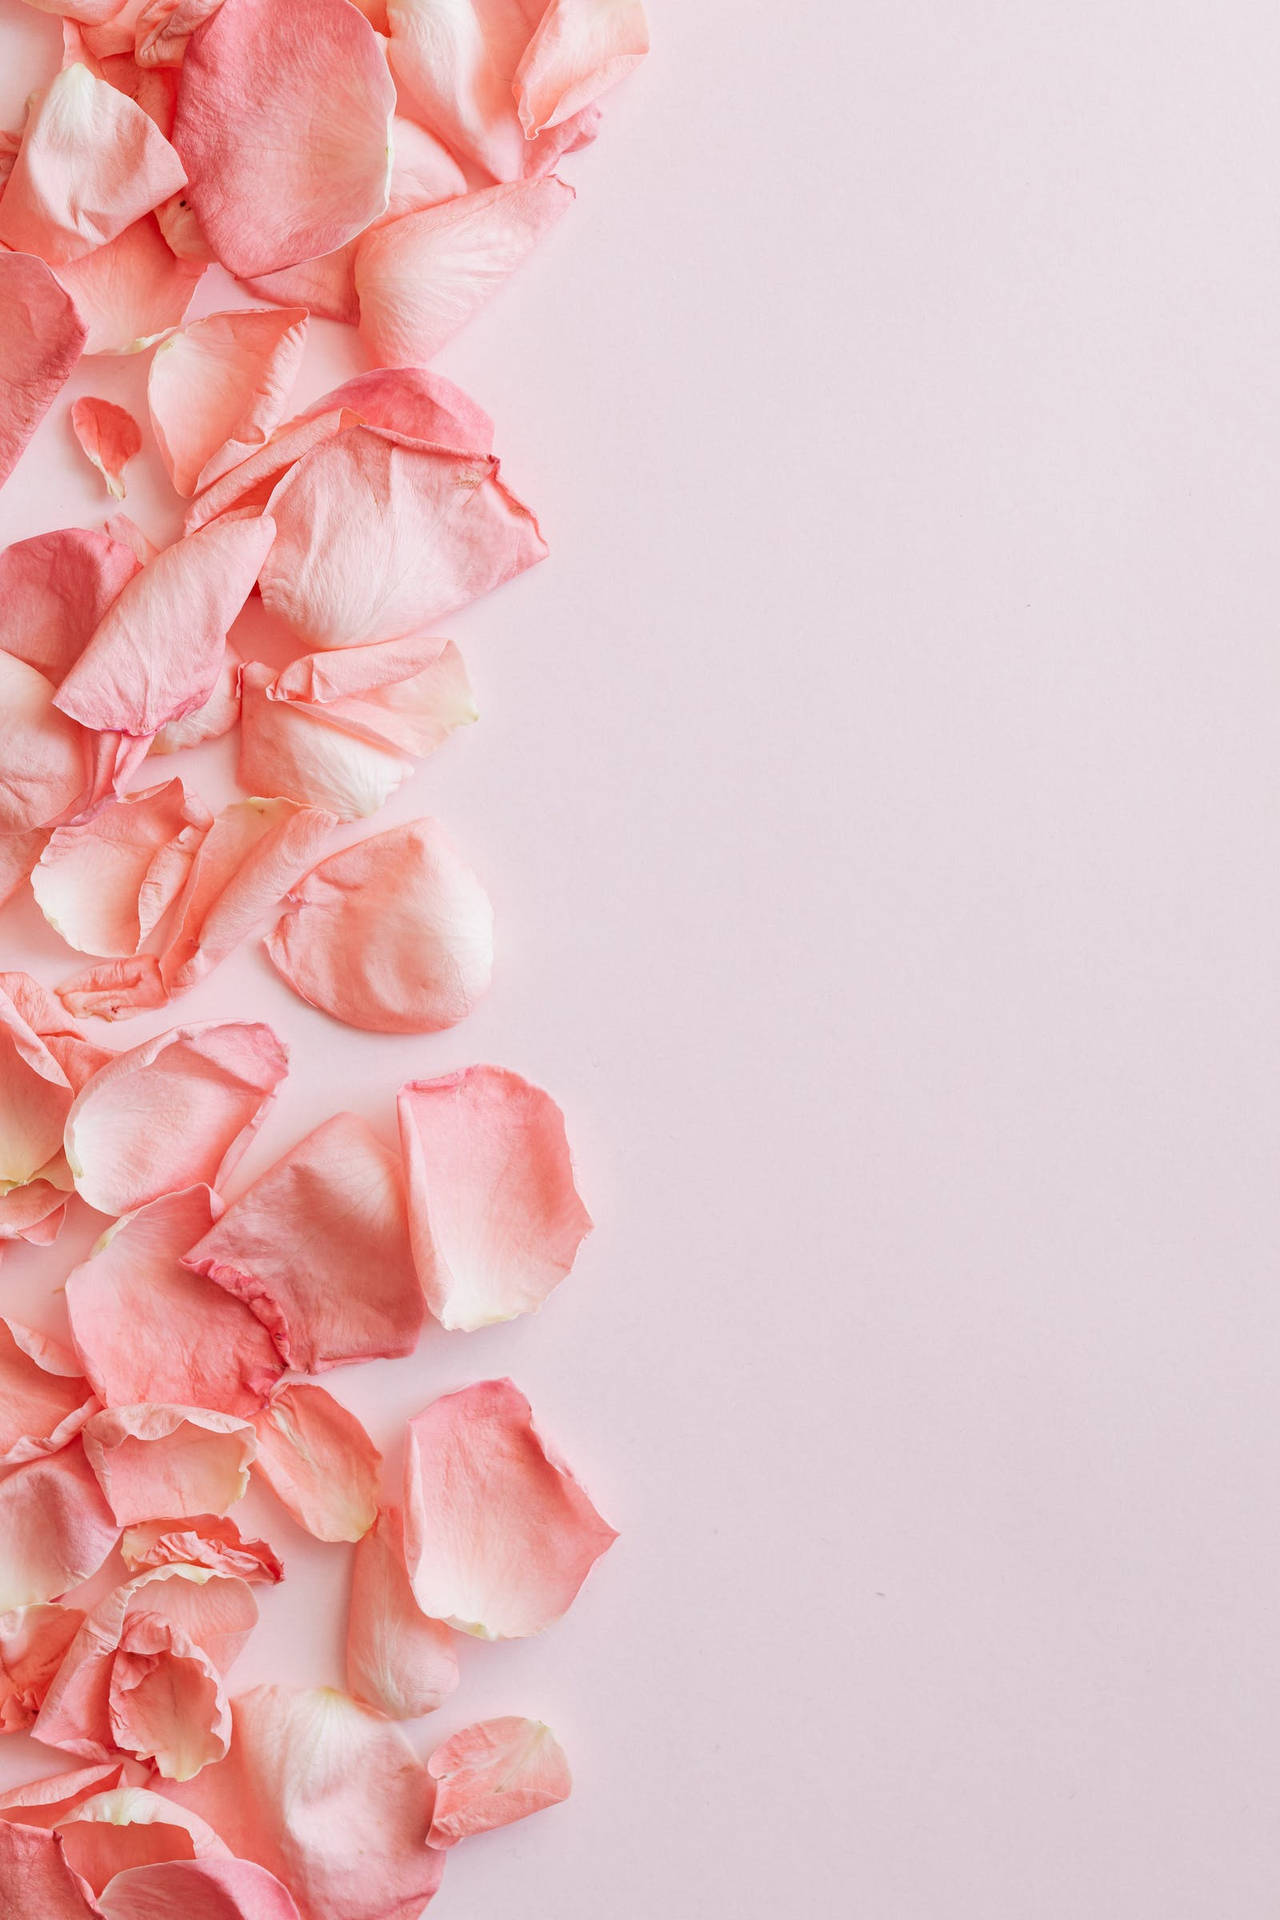 Pastel Pink Aesthetic Rose Petals Background